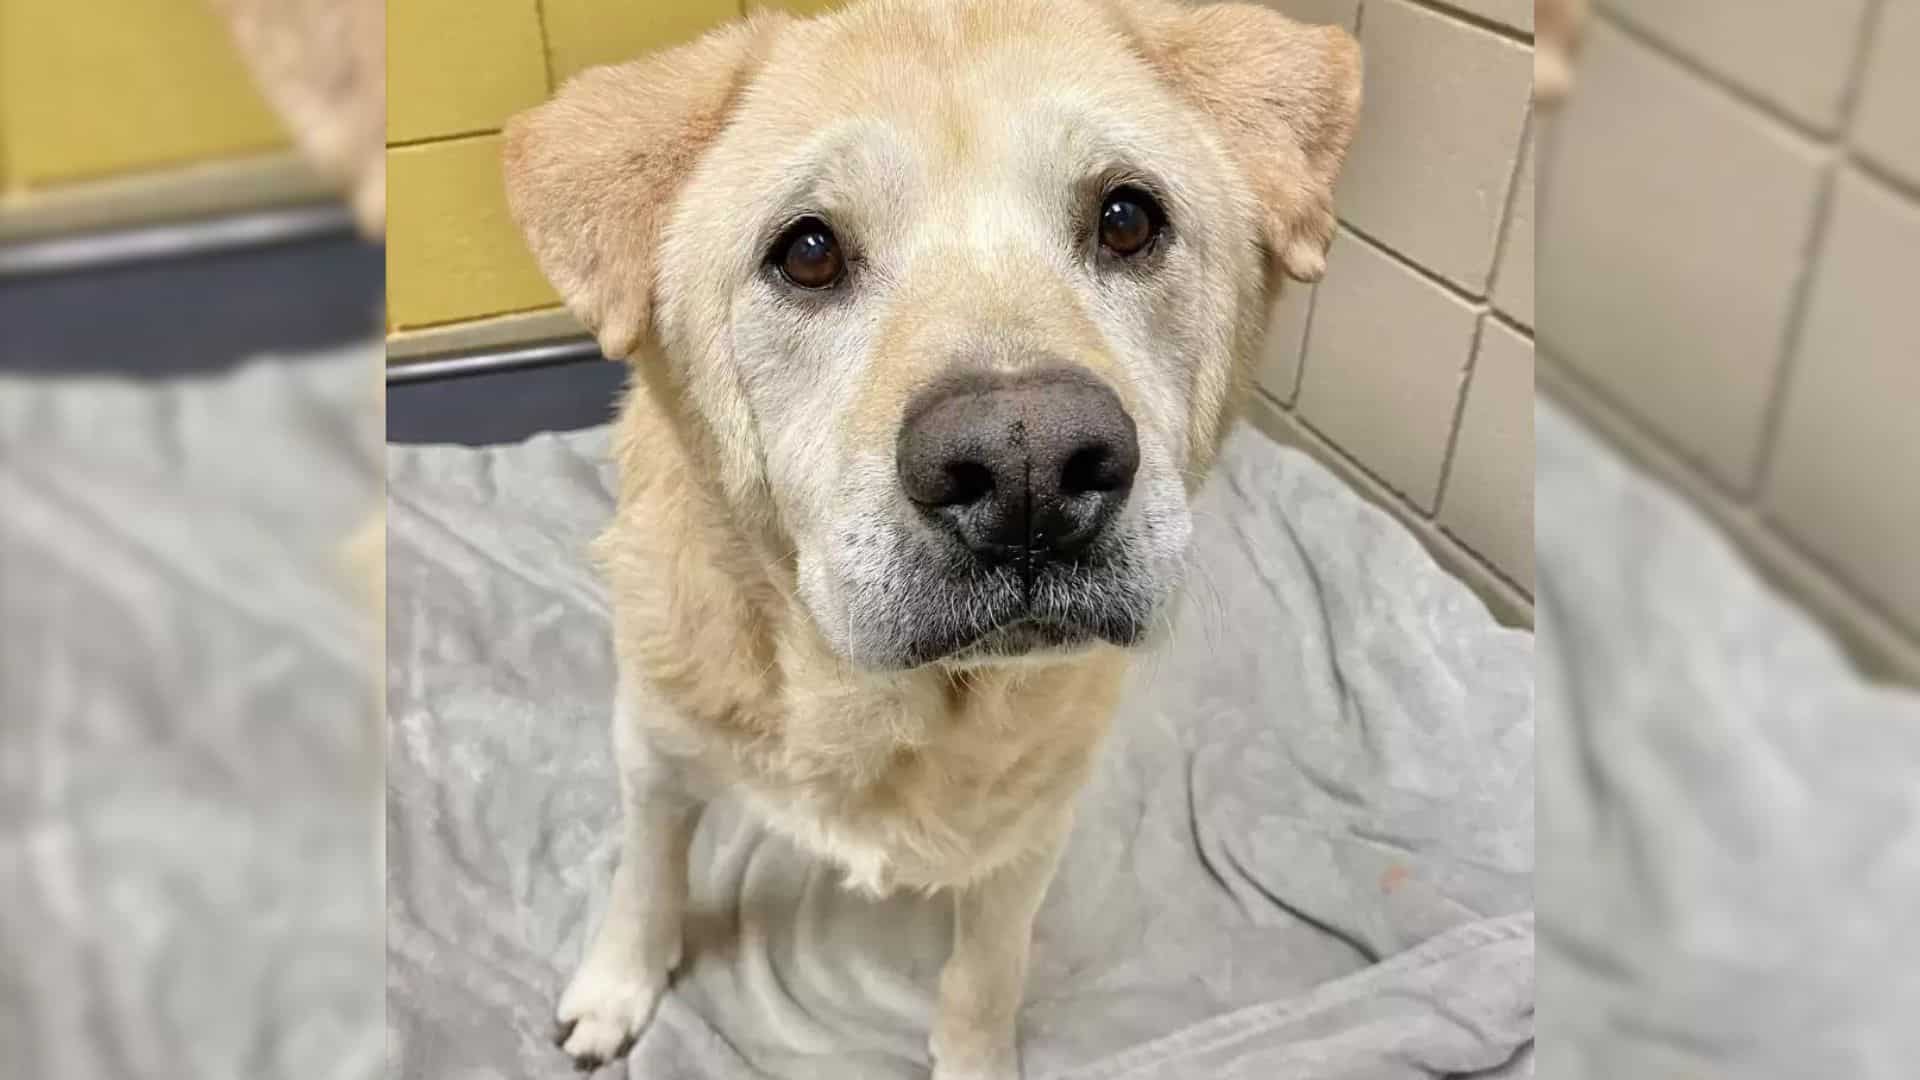 This Sweet Dog Was Returned To The Shelter 8 Times Before Finding His Forever Home